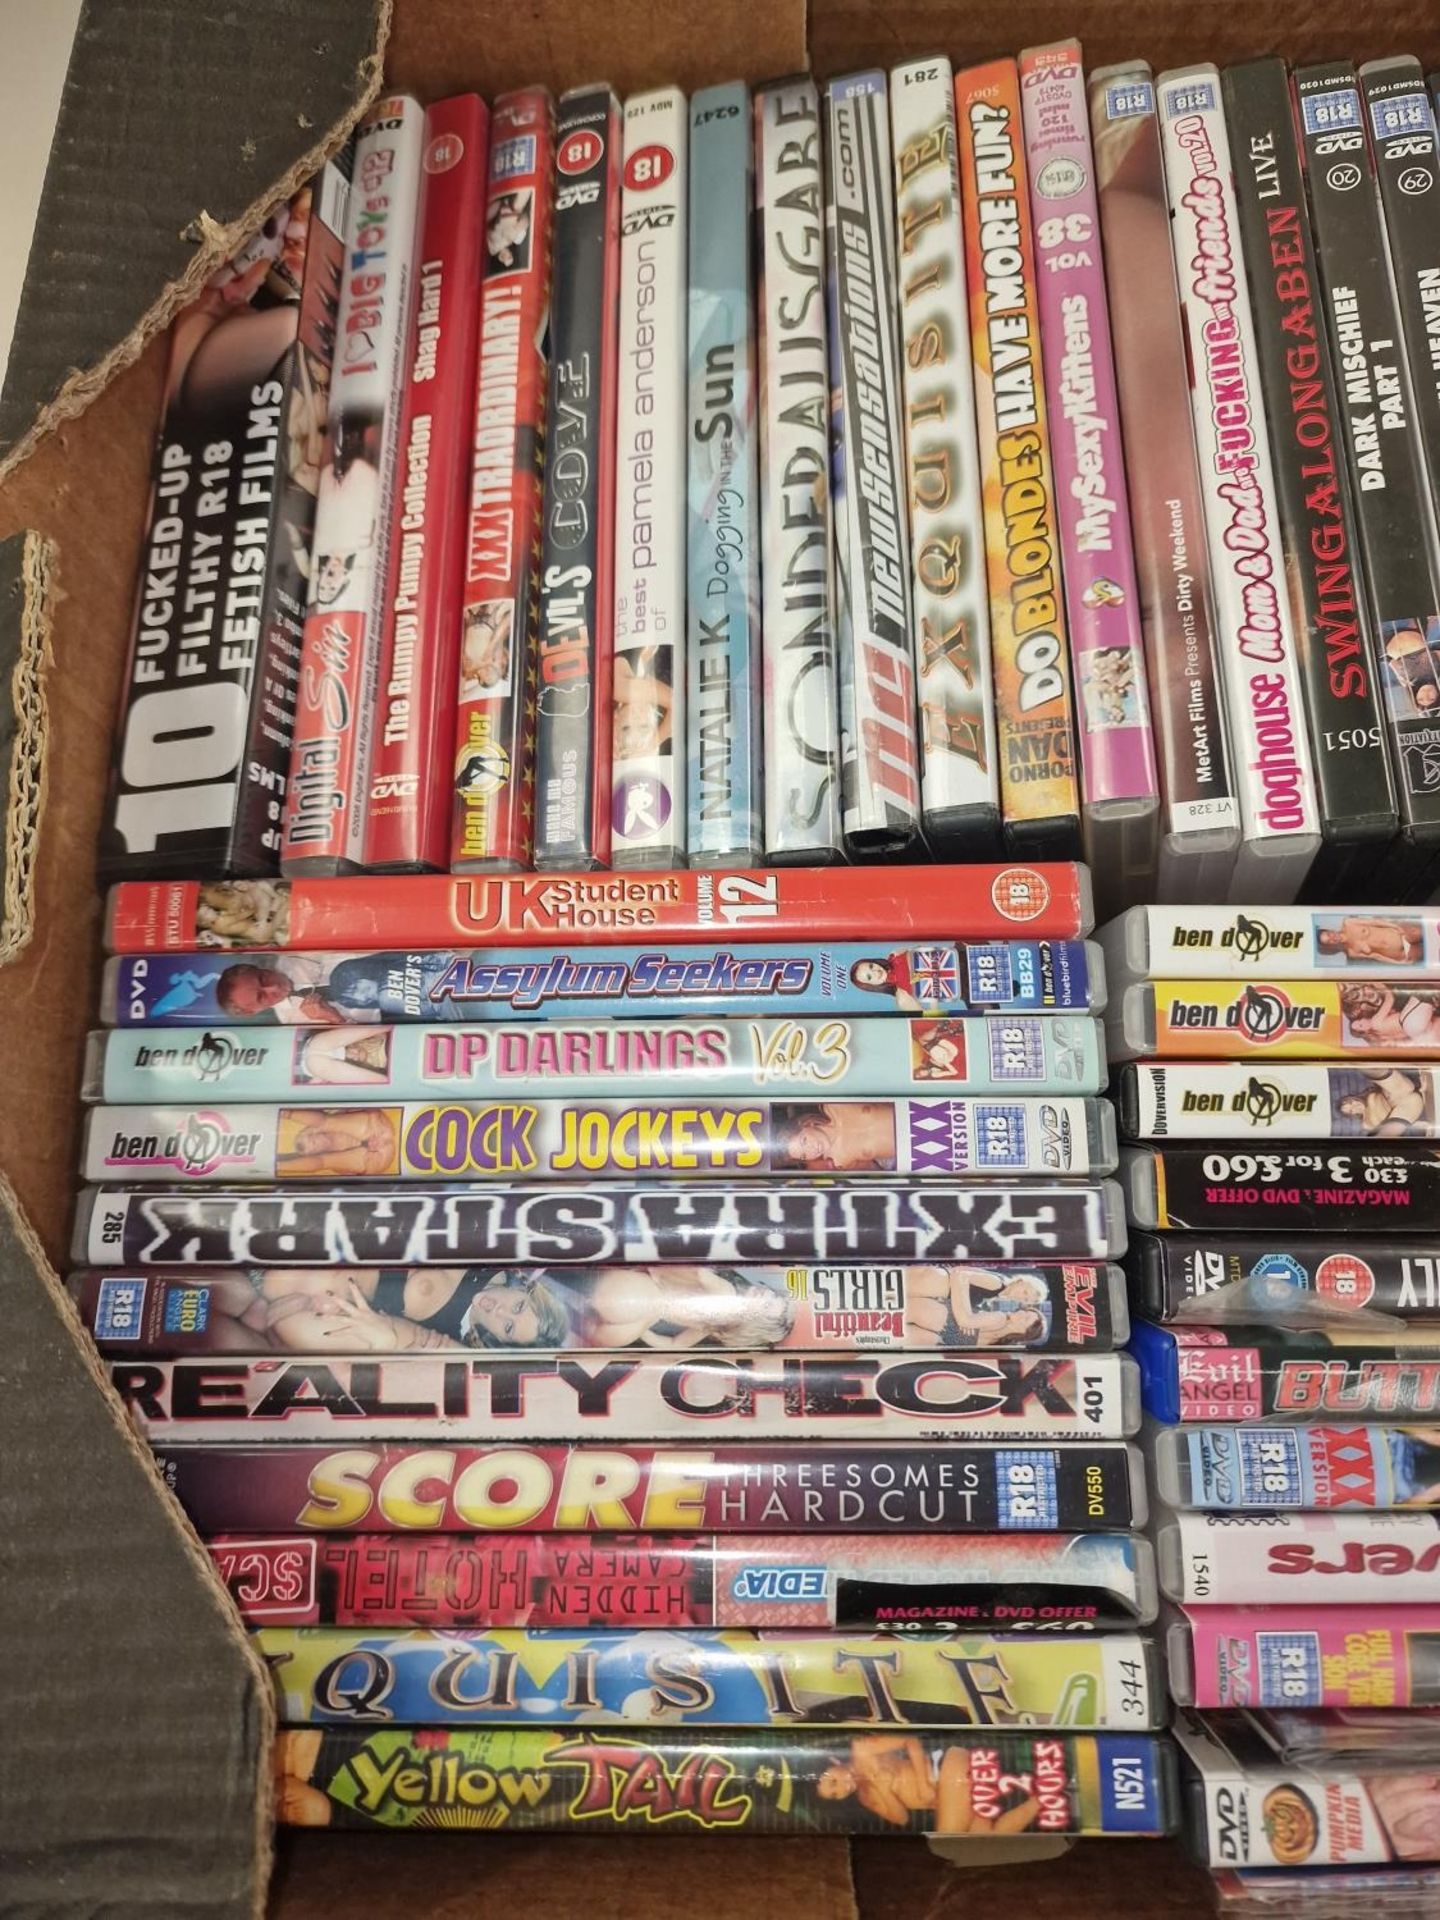 Large tray of various naughty X rated pornographic DVD’s. - Image 2 of 3